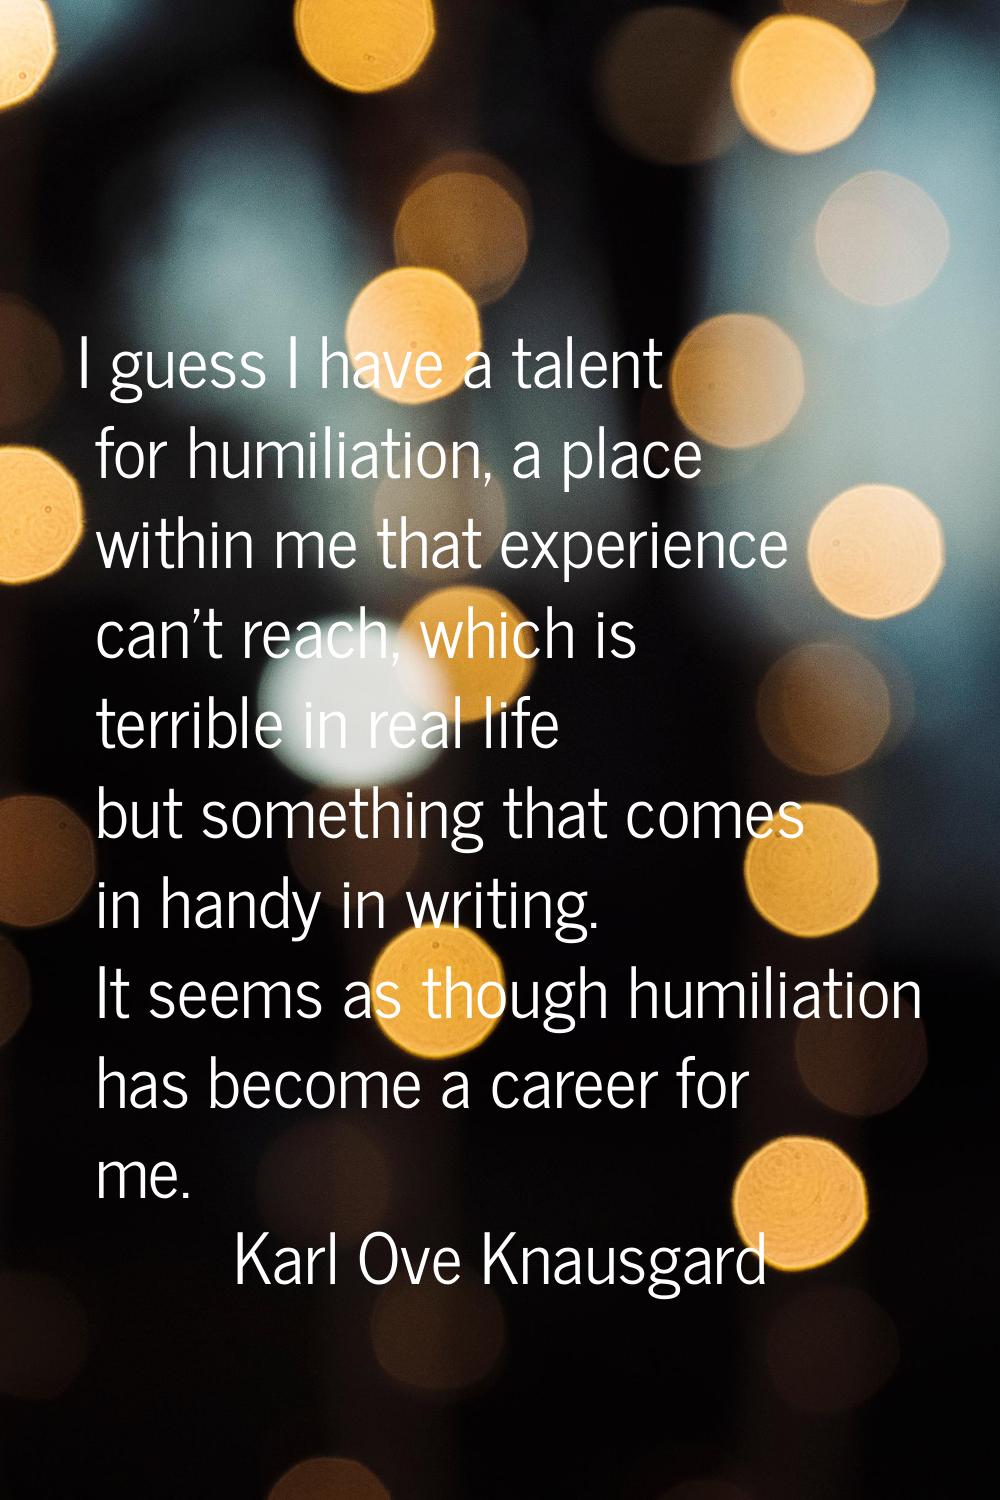 I guess I have a talent for humiliation, a place within me that experience can't reach, which is te